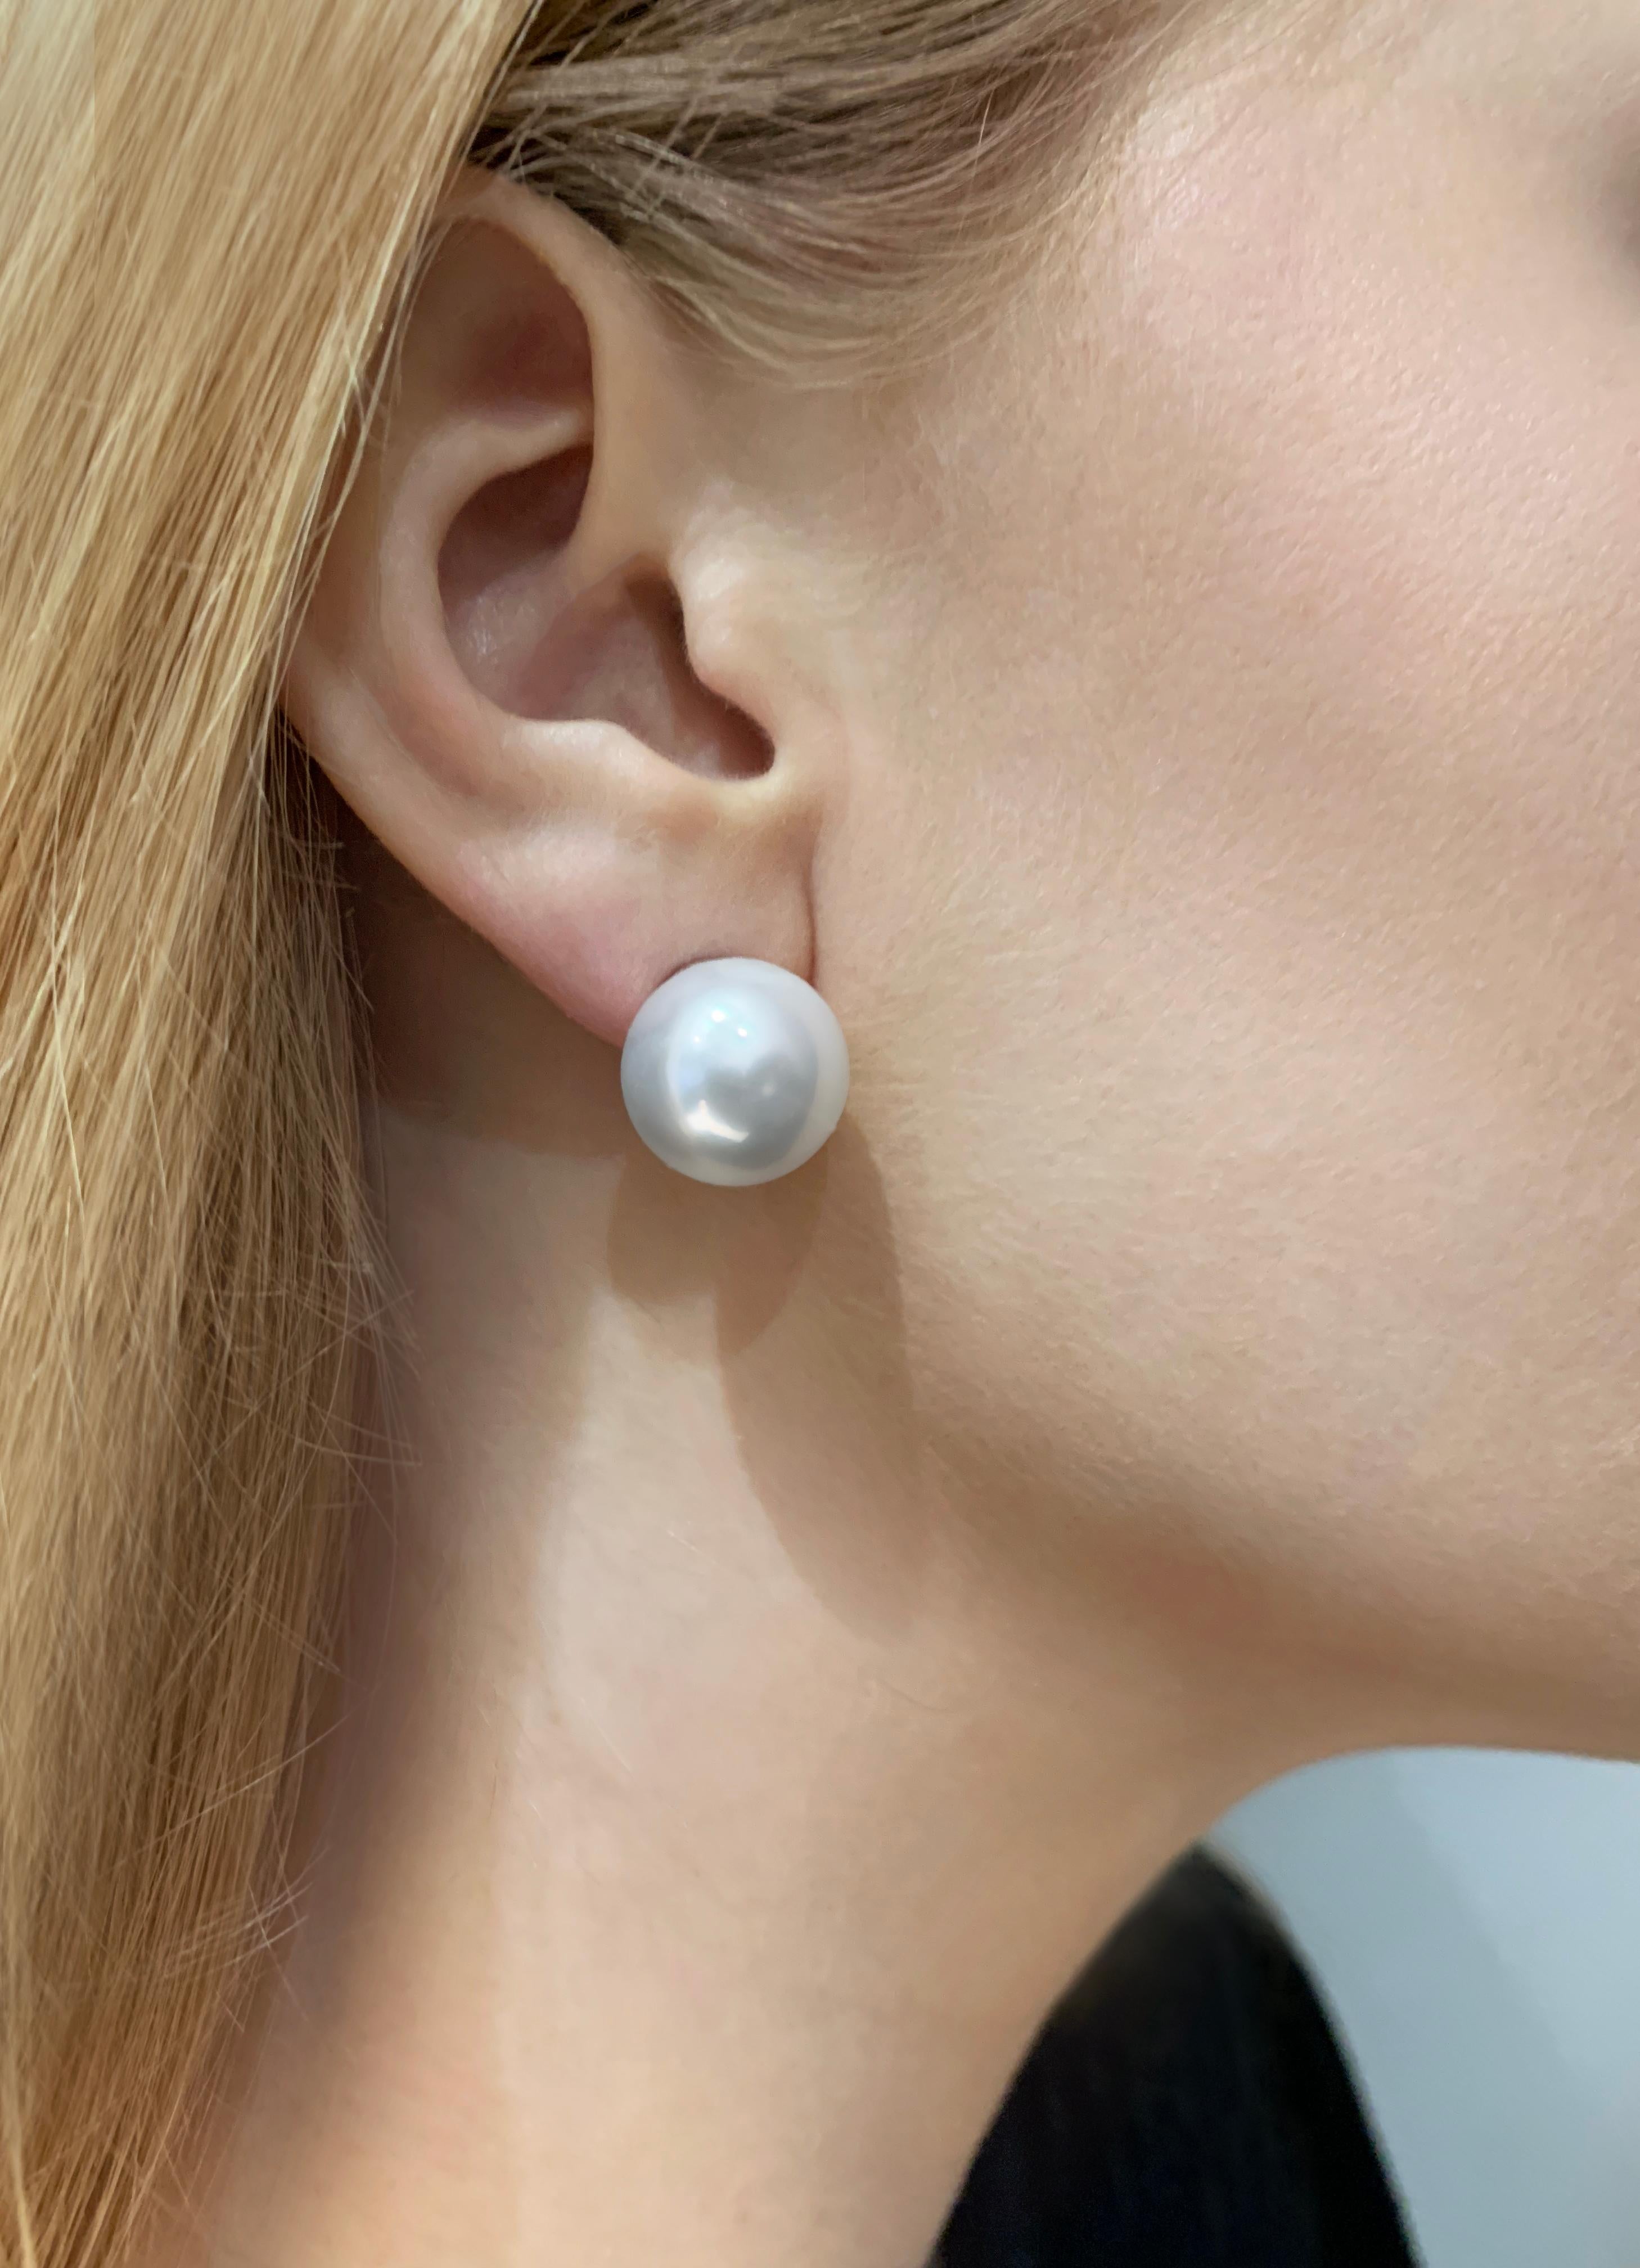 The Australian South Sea Pearls which proudly sit at the forefront of these Yoko London earring studs, have been hand selected by experts for their cool silvery hue, deep lustre, and impeccable surface quality. 

A jewellery box staple, this classic